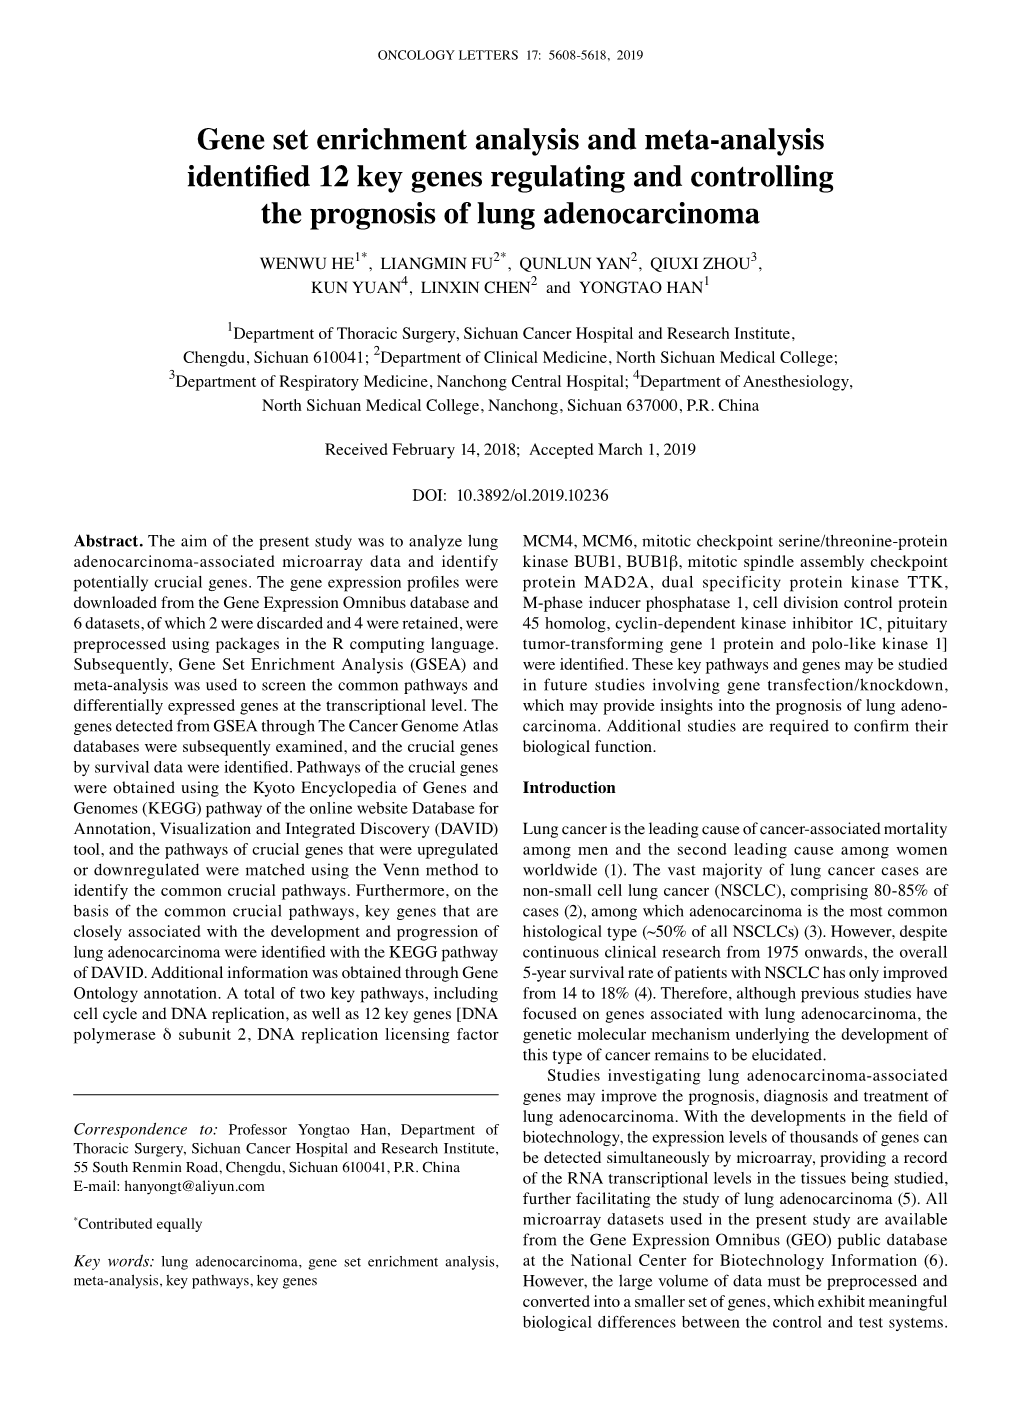 Gene Set Enrichment Analysis and Meta‑Analysis Identified 12 Key Genes Regulating and Controlling the Prognosis of Lung Adenocarcinoma